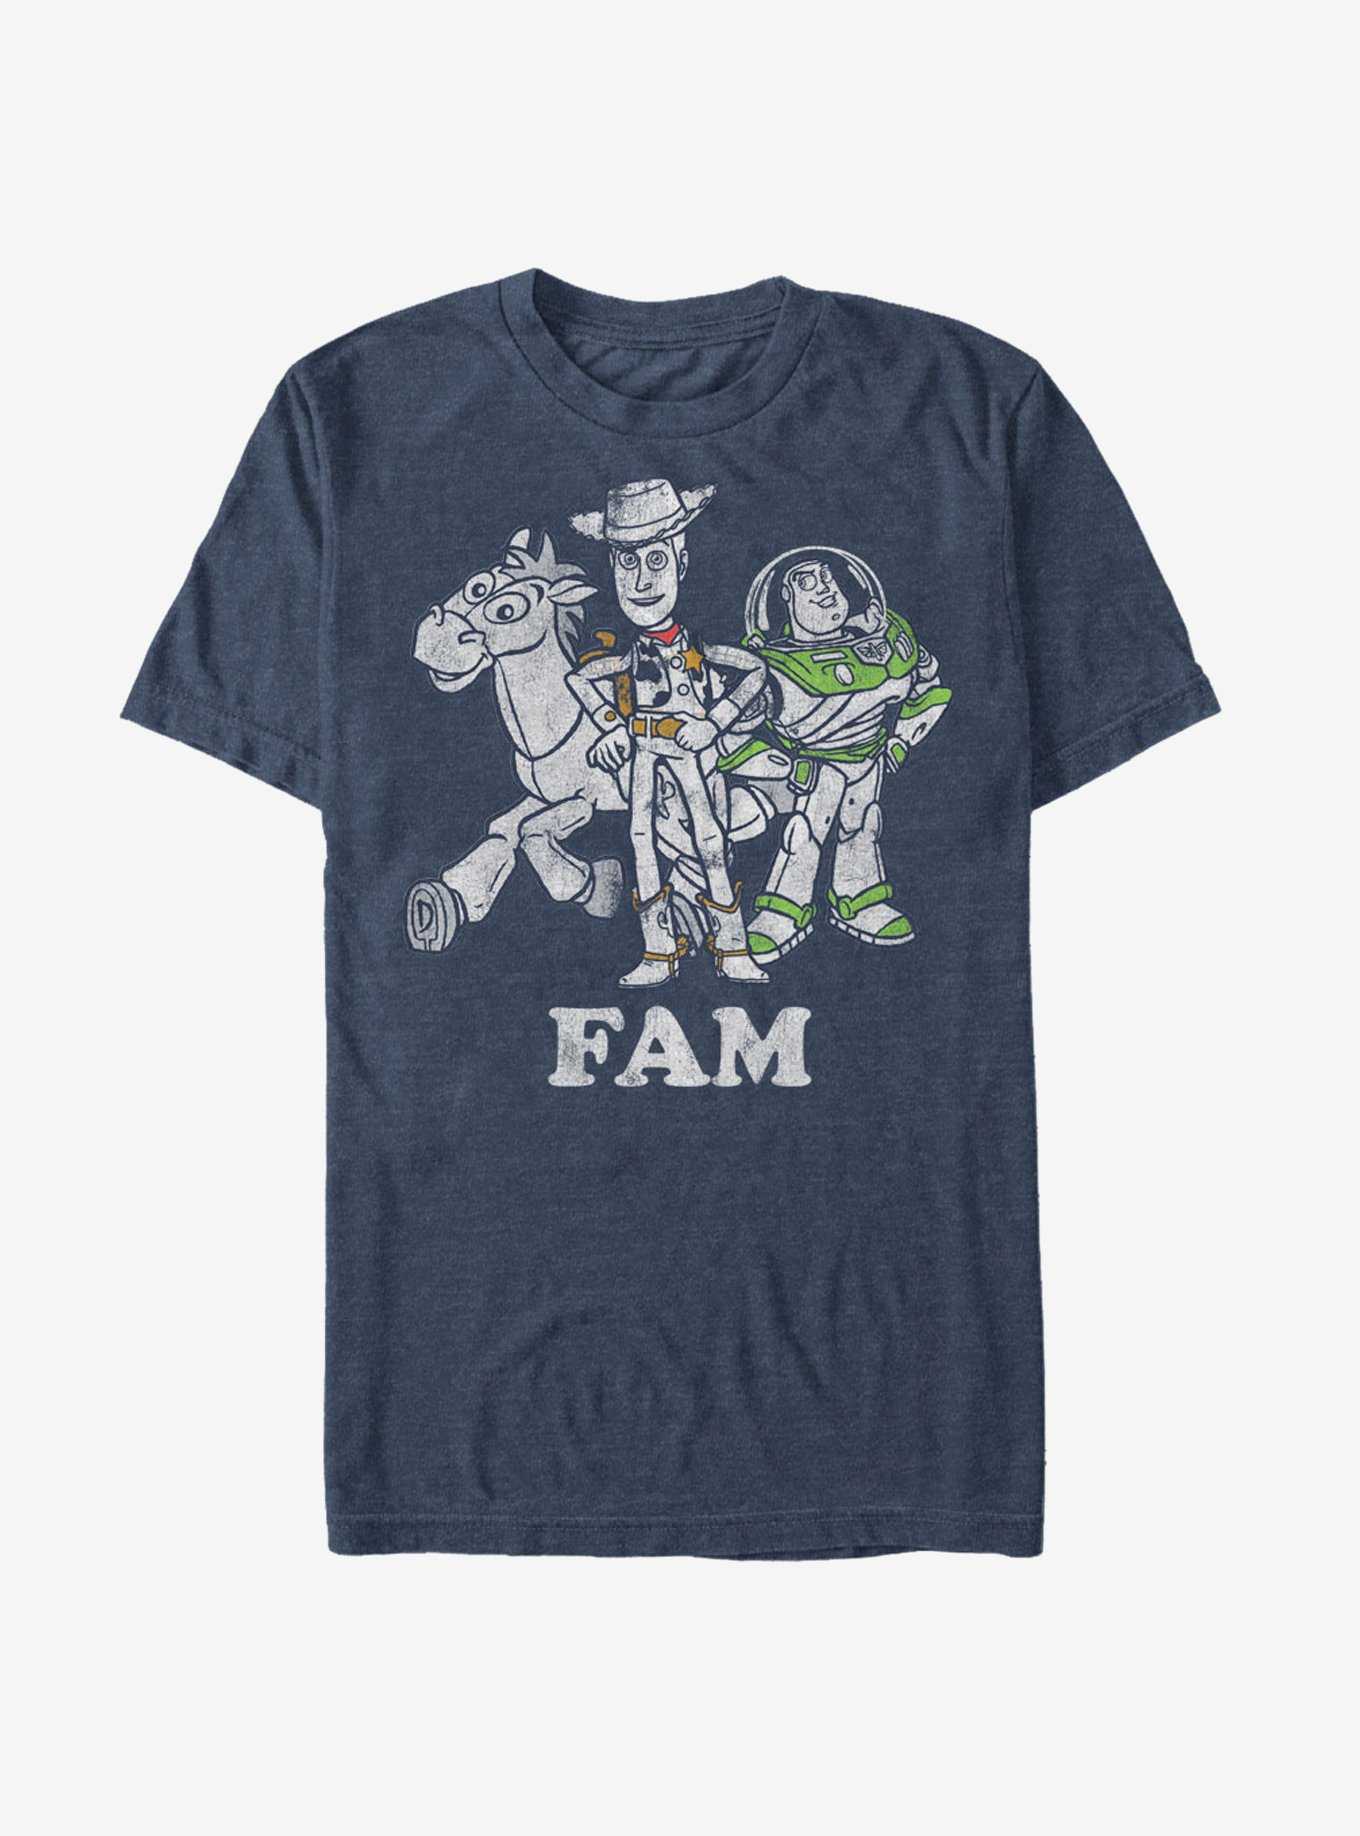 Toy Story Buzz Lightyear and Woody Fam T-Shirt, , hi-res